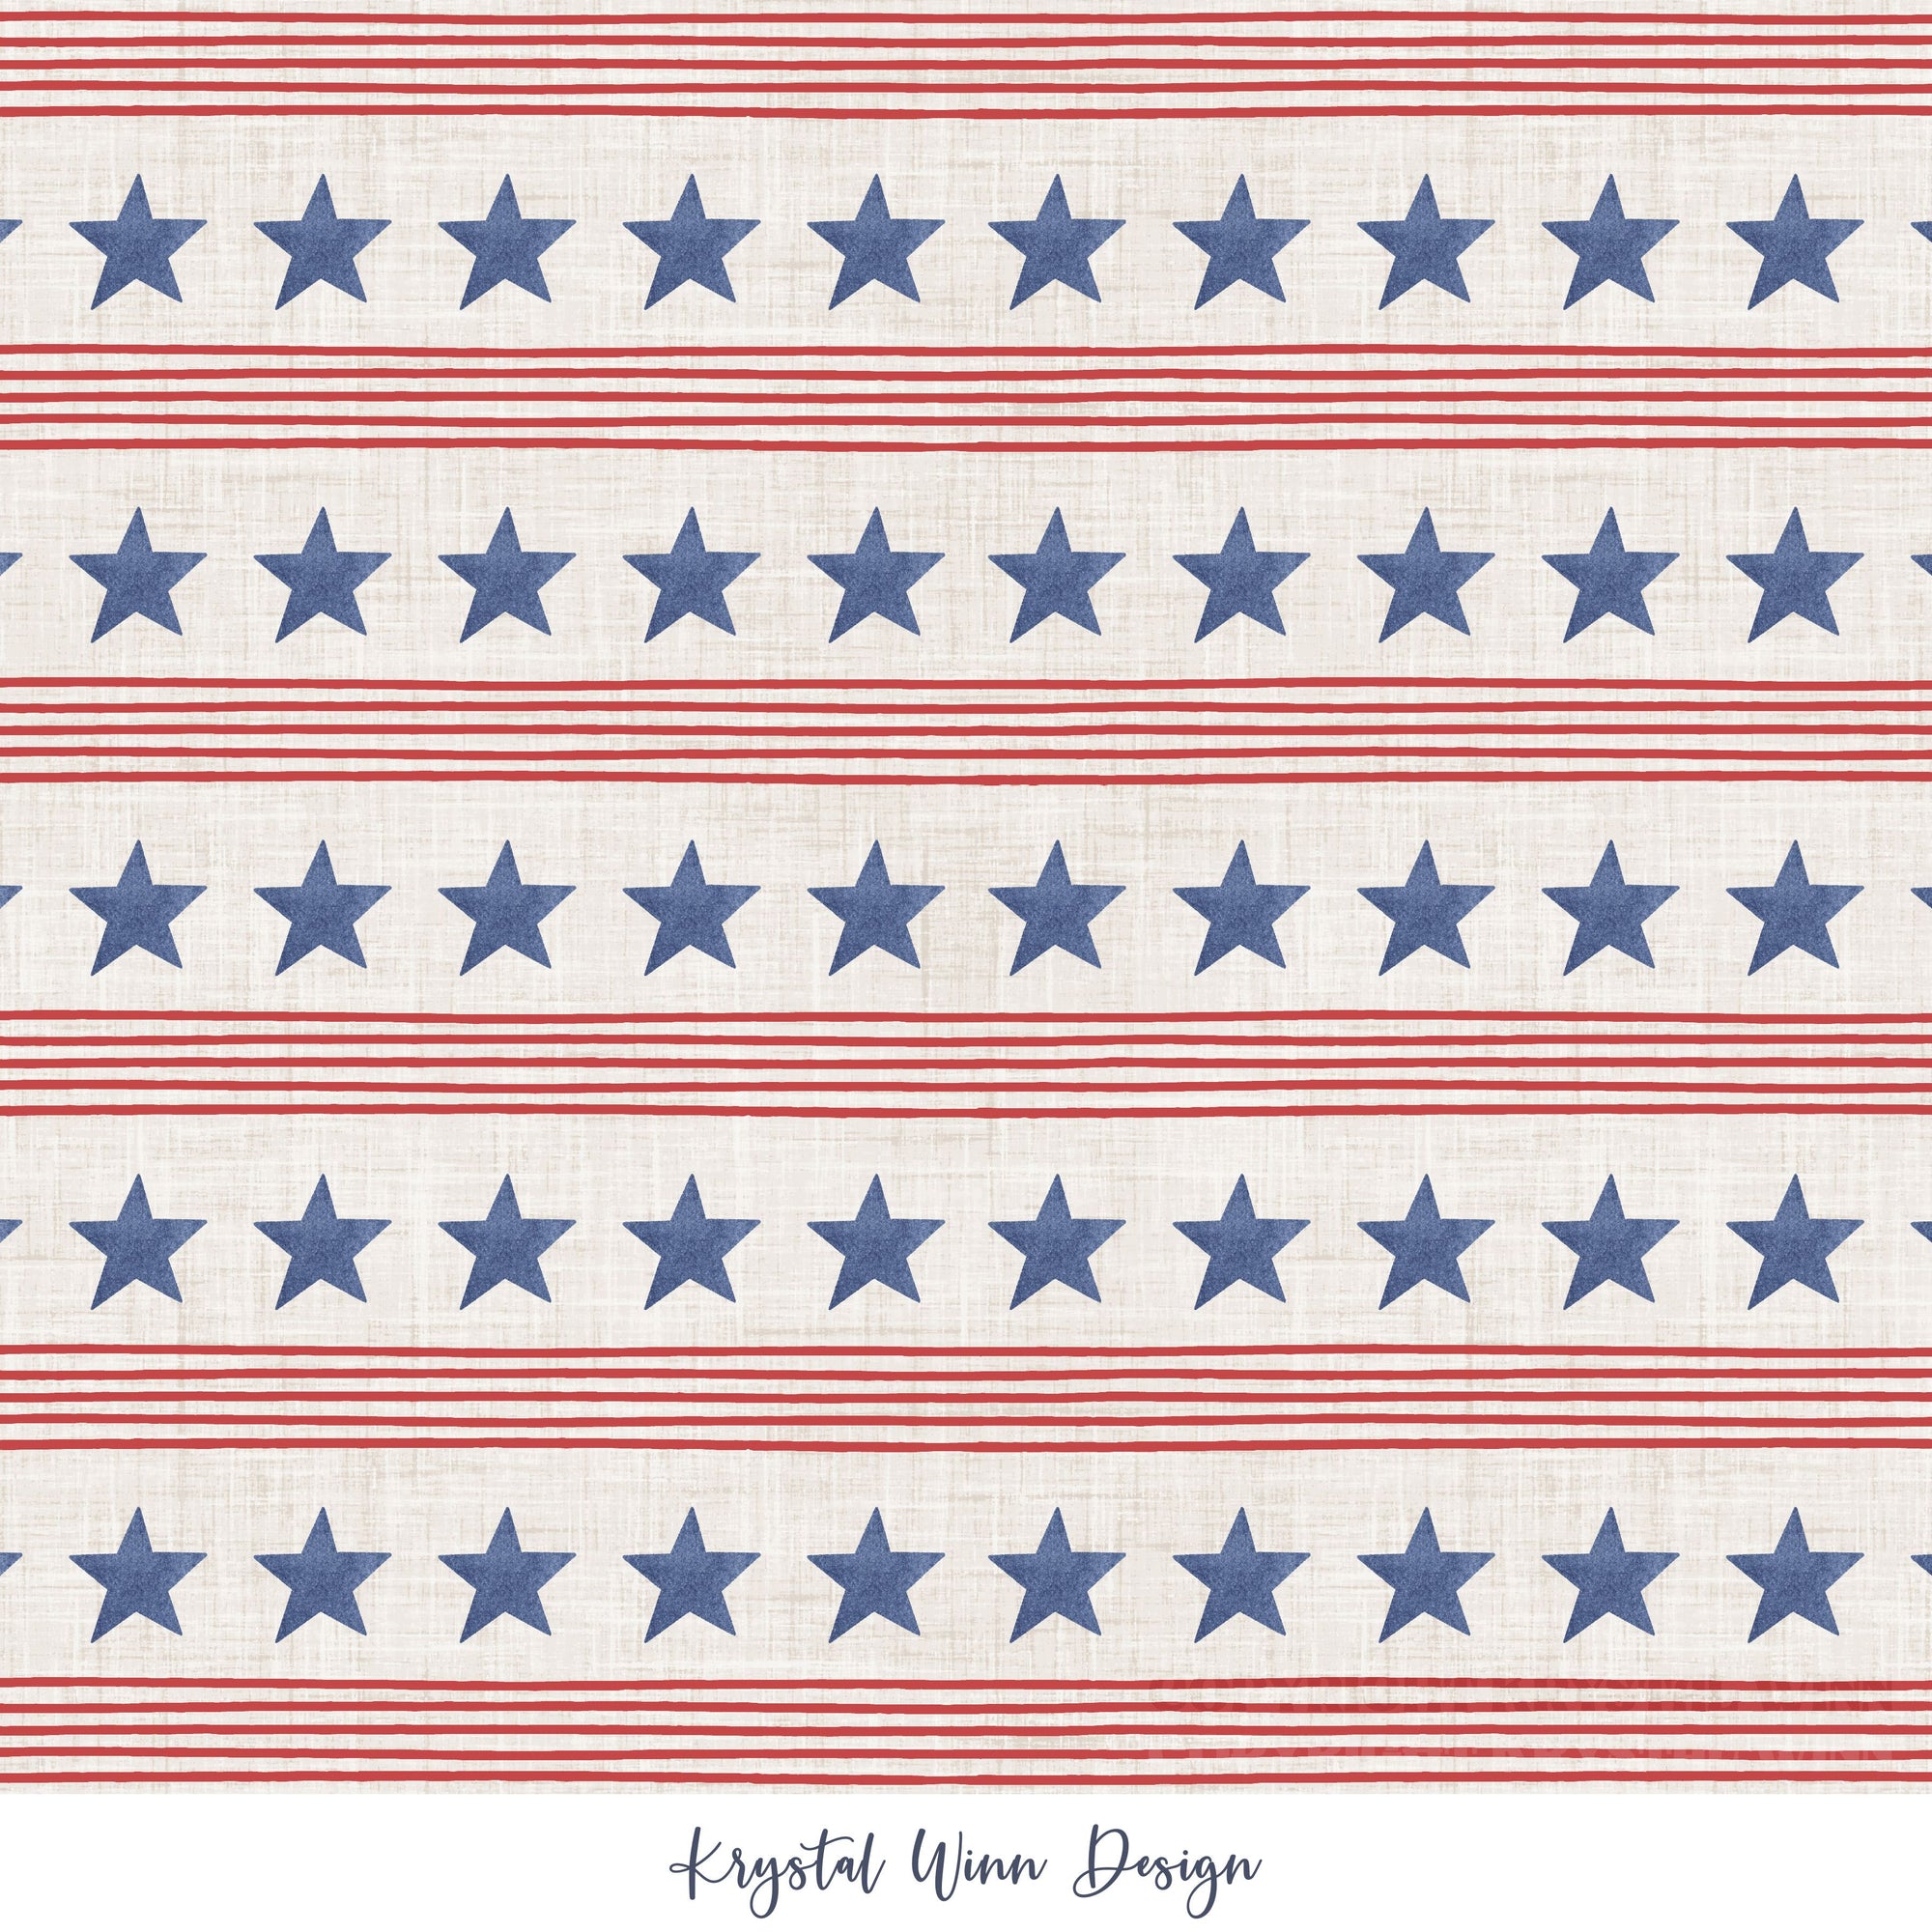 Yankee Doodle Stars and Stripes